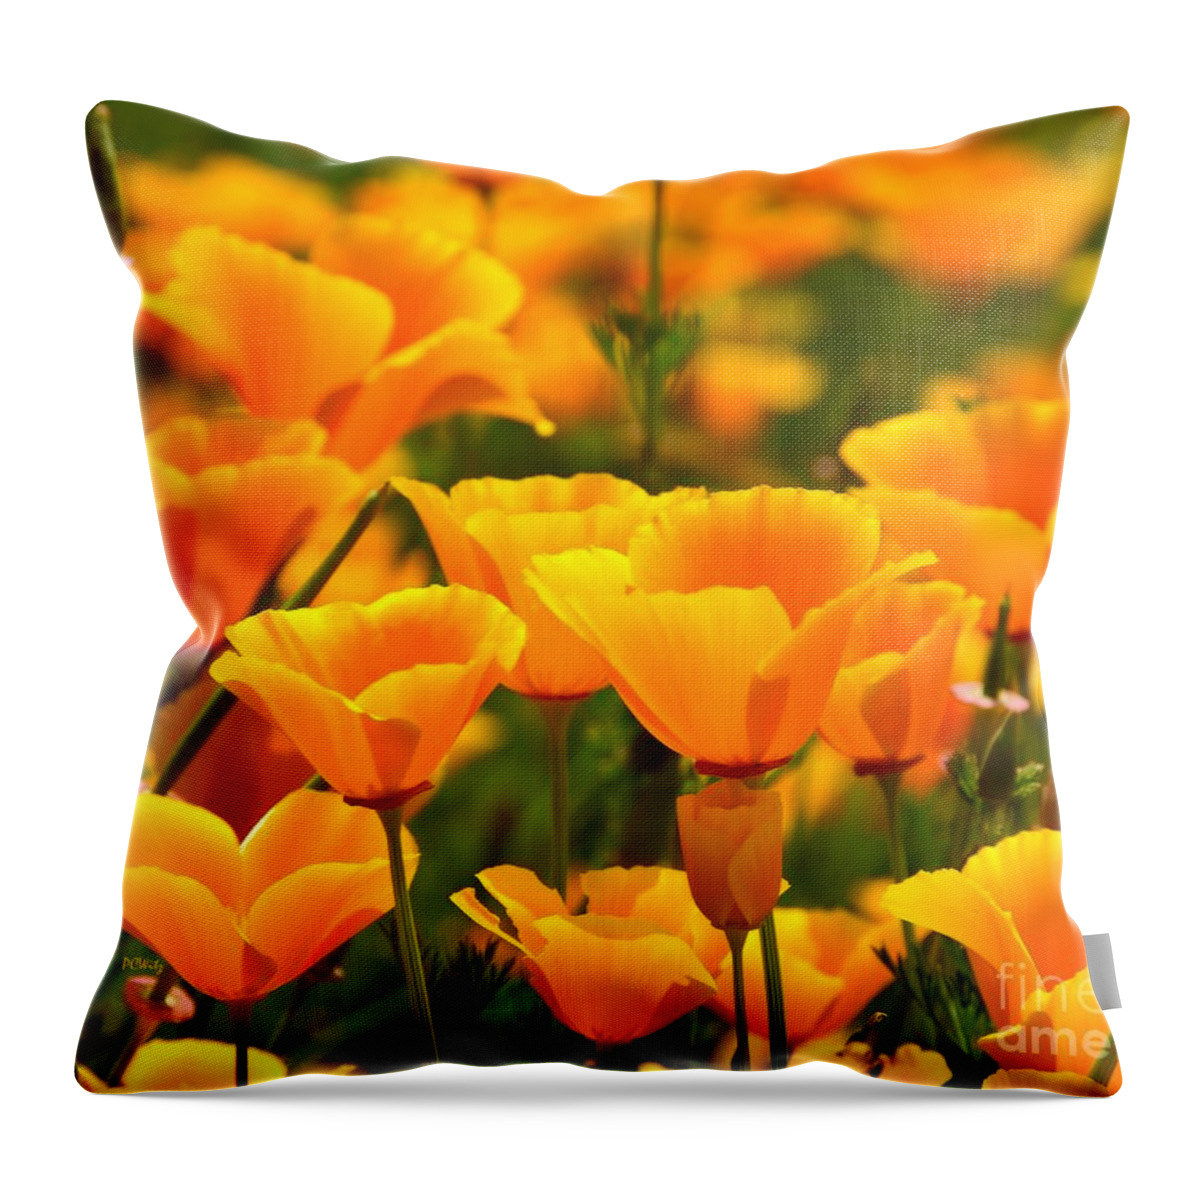 California Poppies Throw Pillow featuring the photograph California Poppies by Patrick Witz